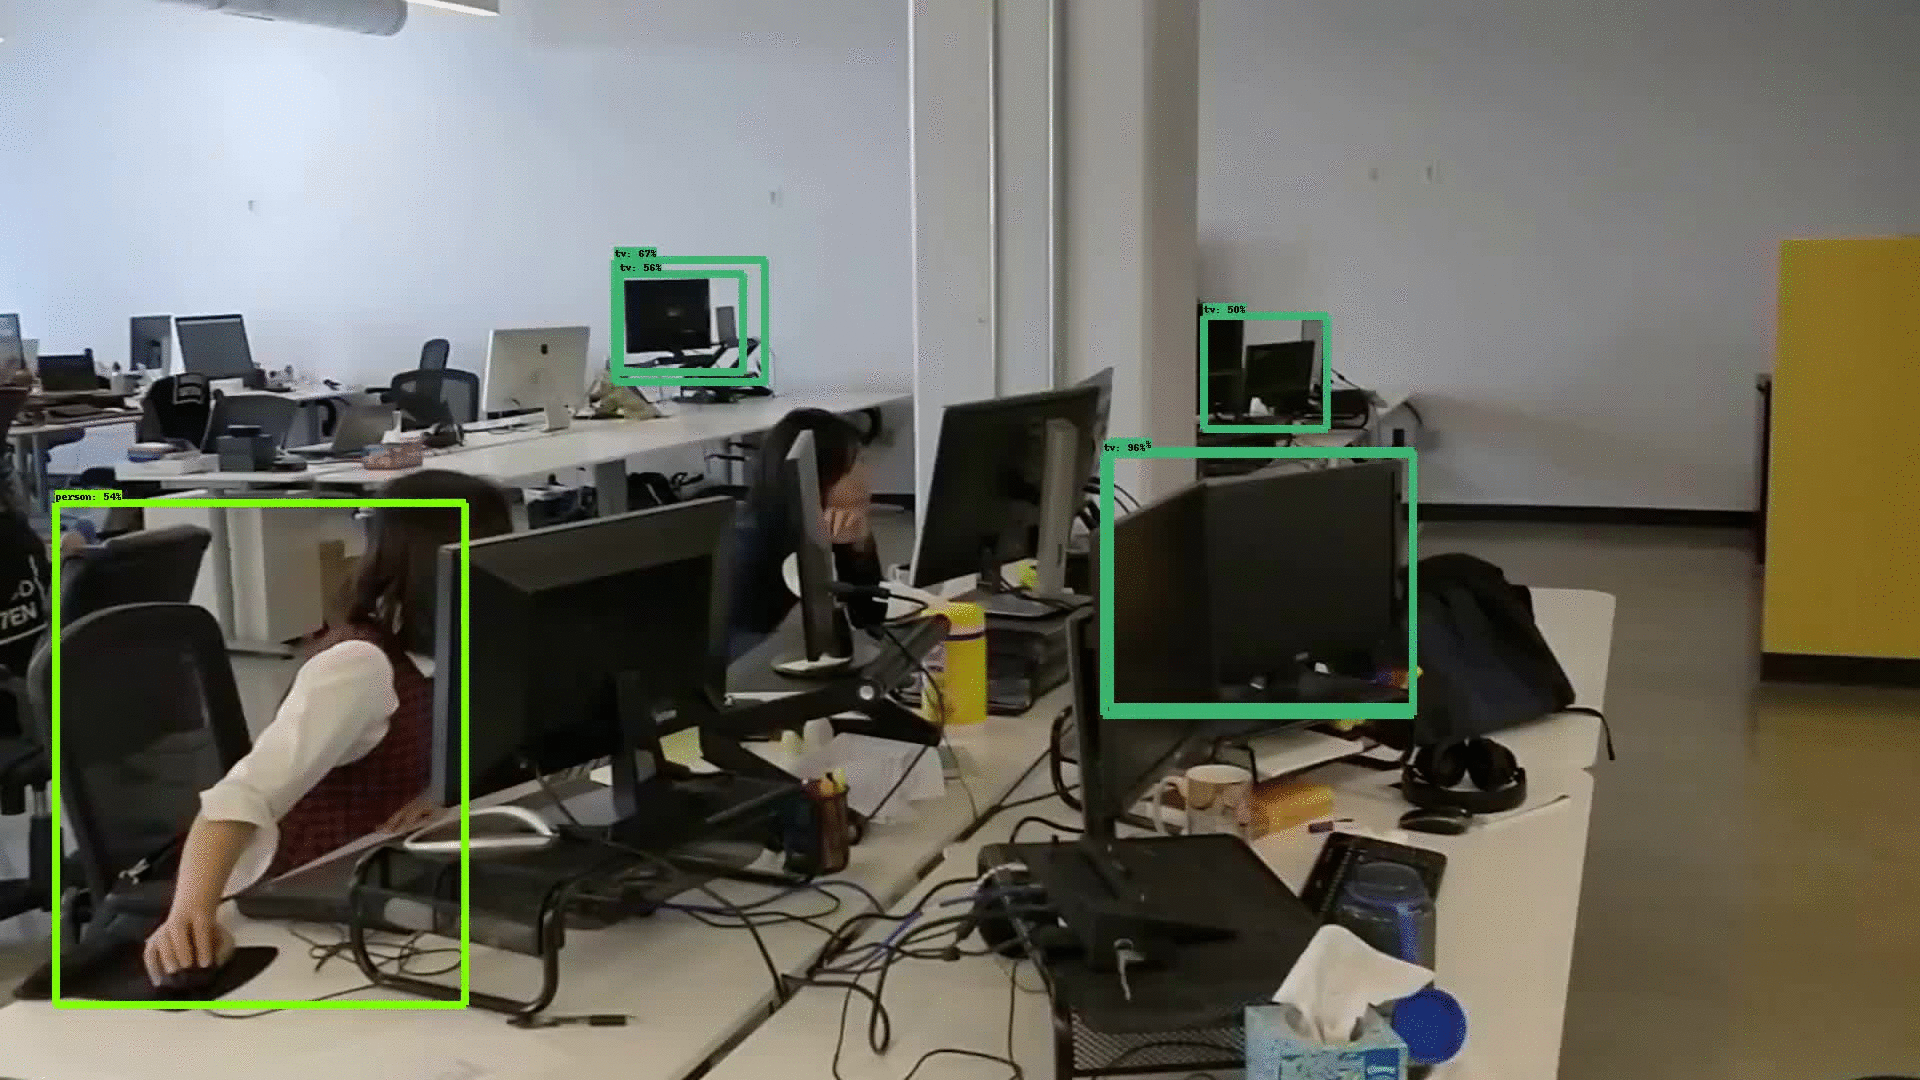 continuous object detection